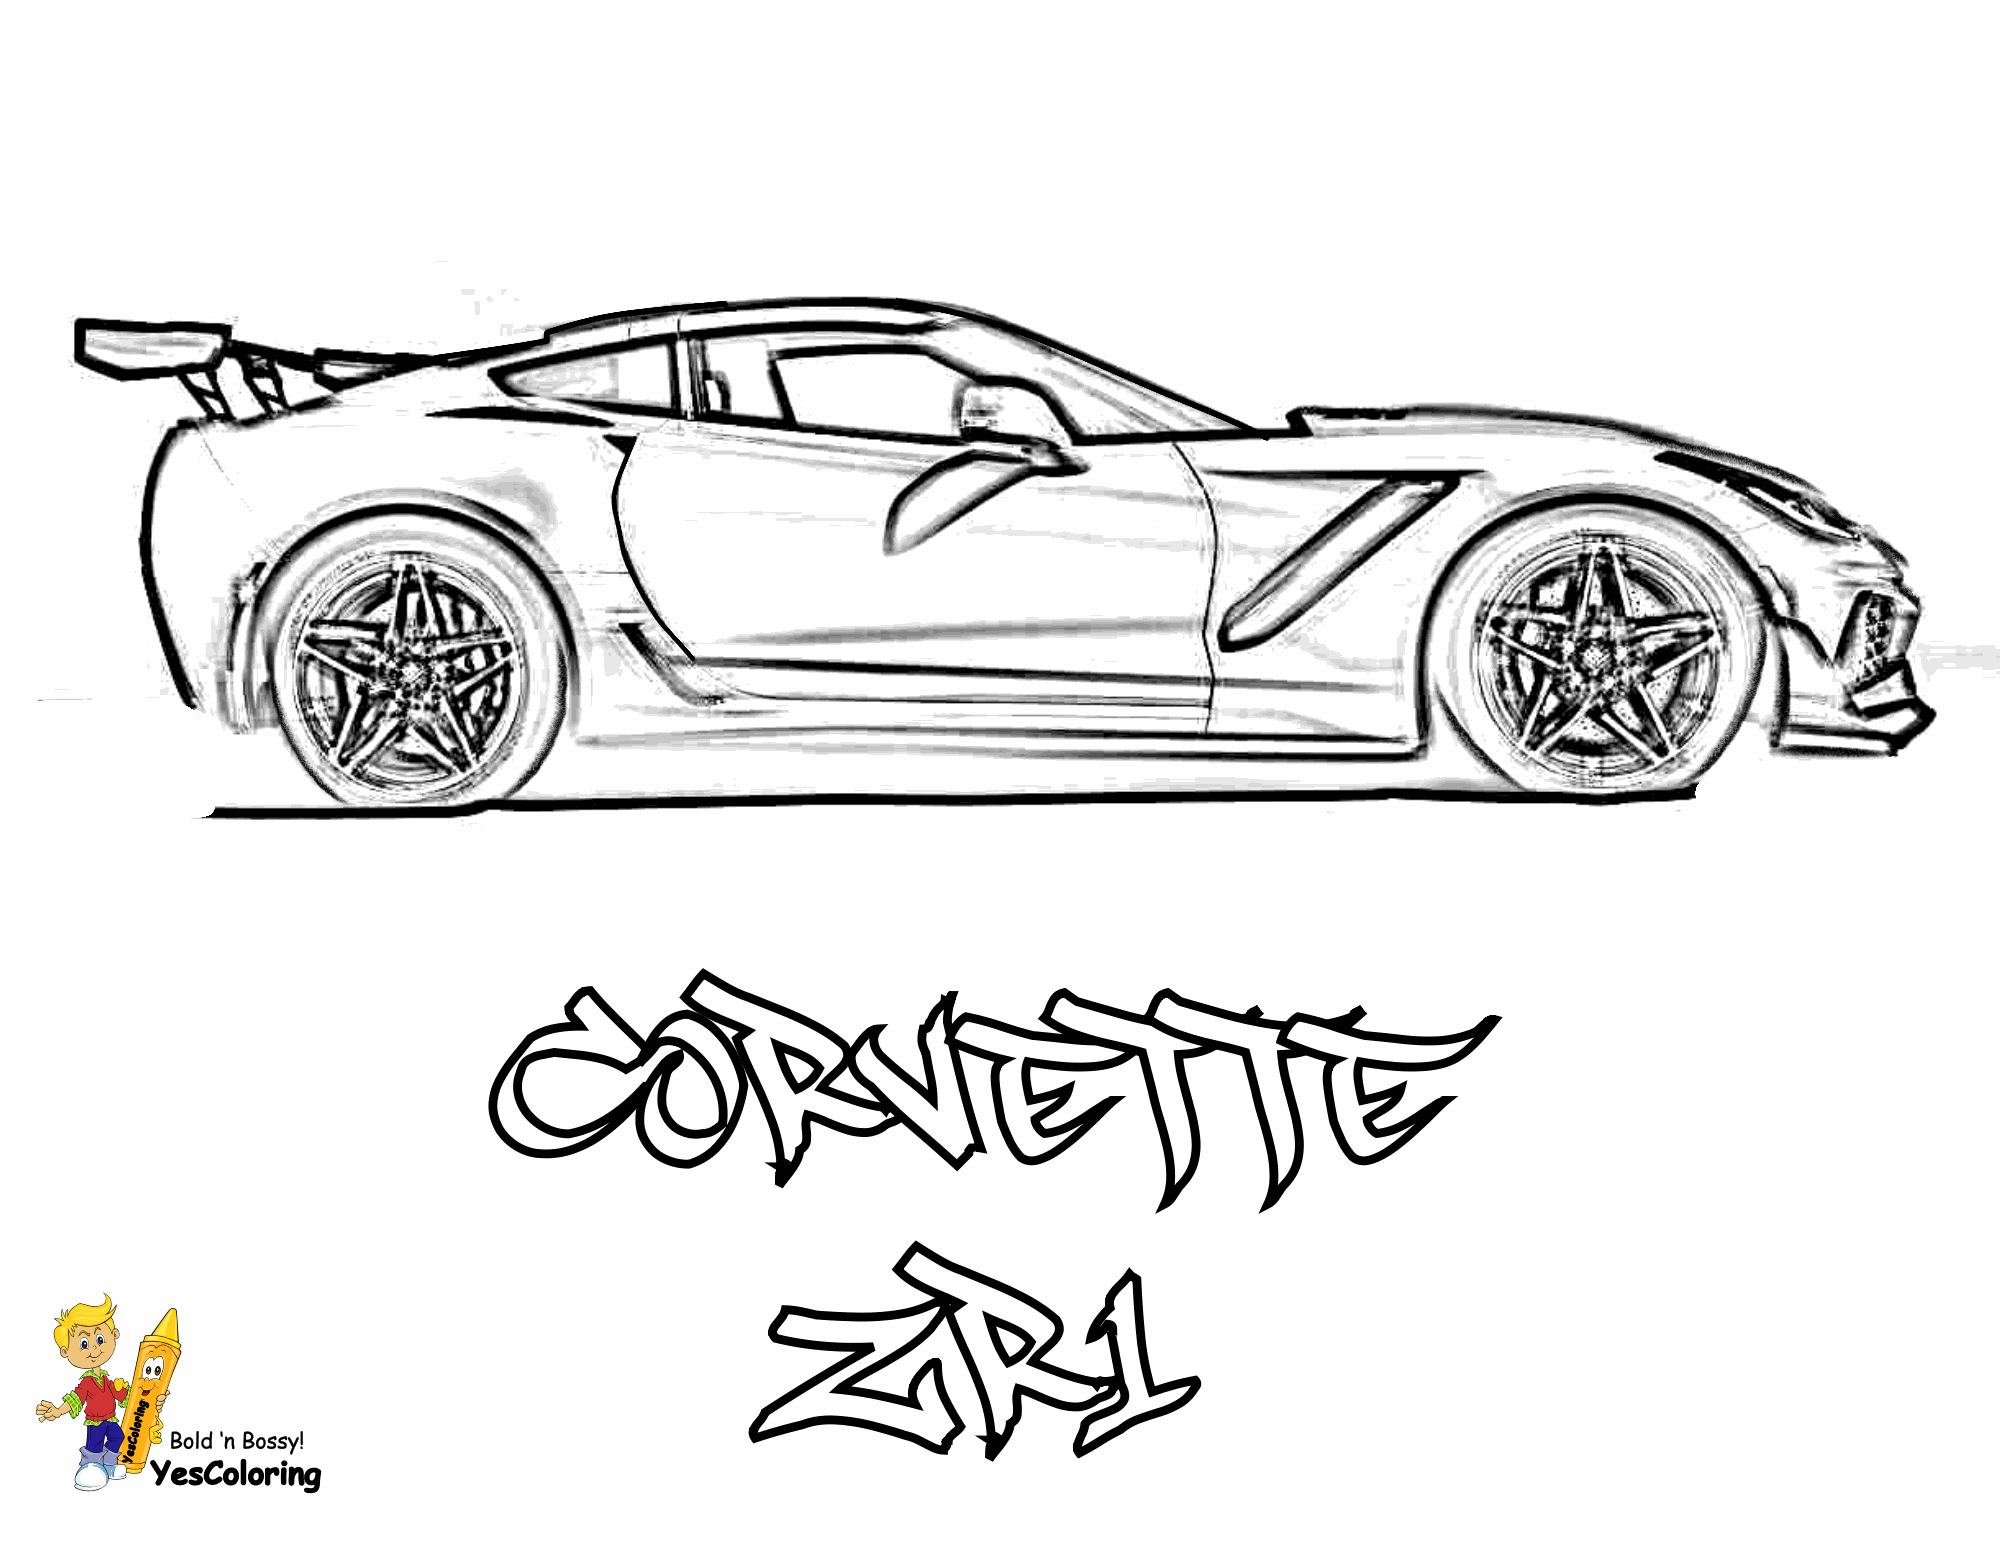 corvette coloring pages corvette coloring pages to download and print for free coloring corvette pages 